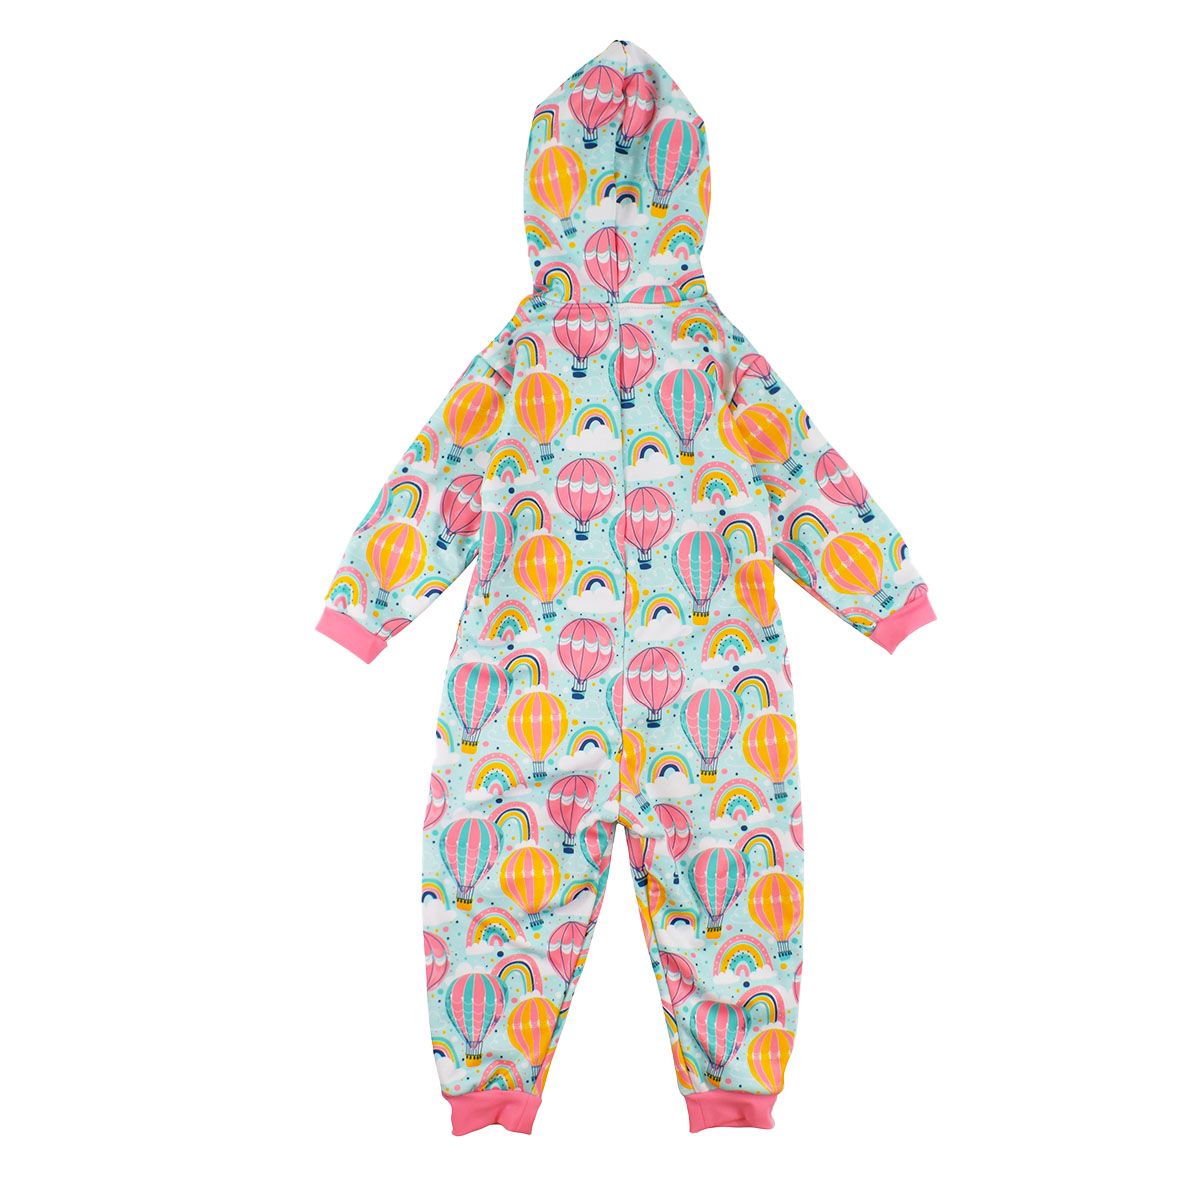 Waterproof fleece-lined onesie with hood in baby blue and hot air balloons themed print, including rainbows and clouds. Pink trims. Back.